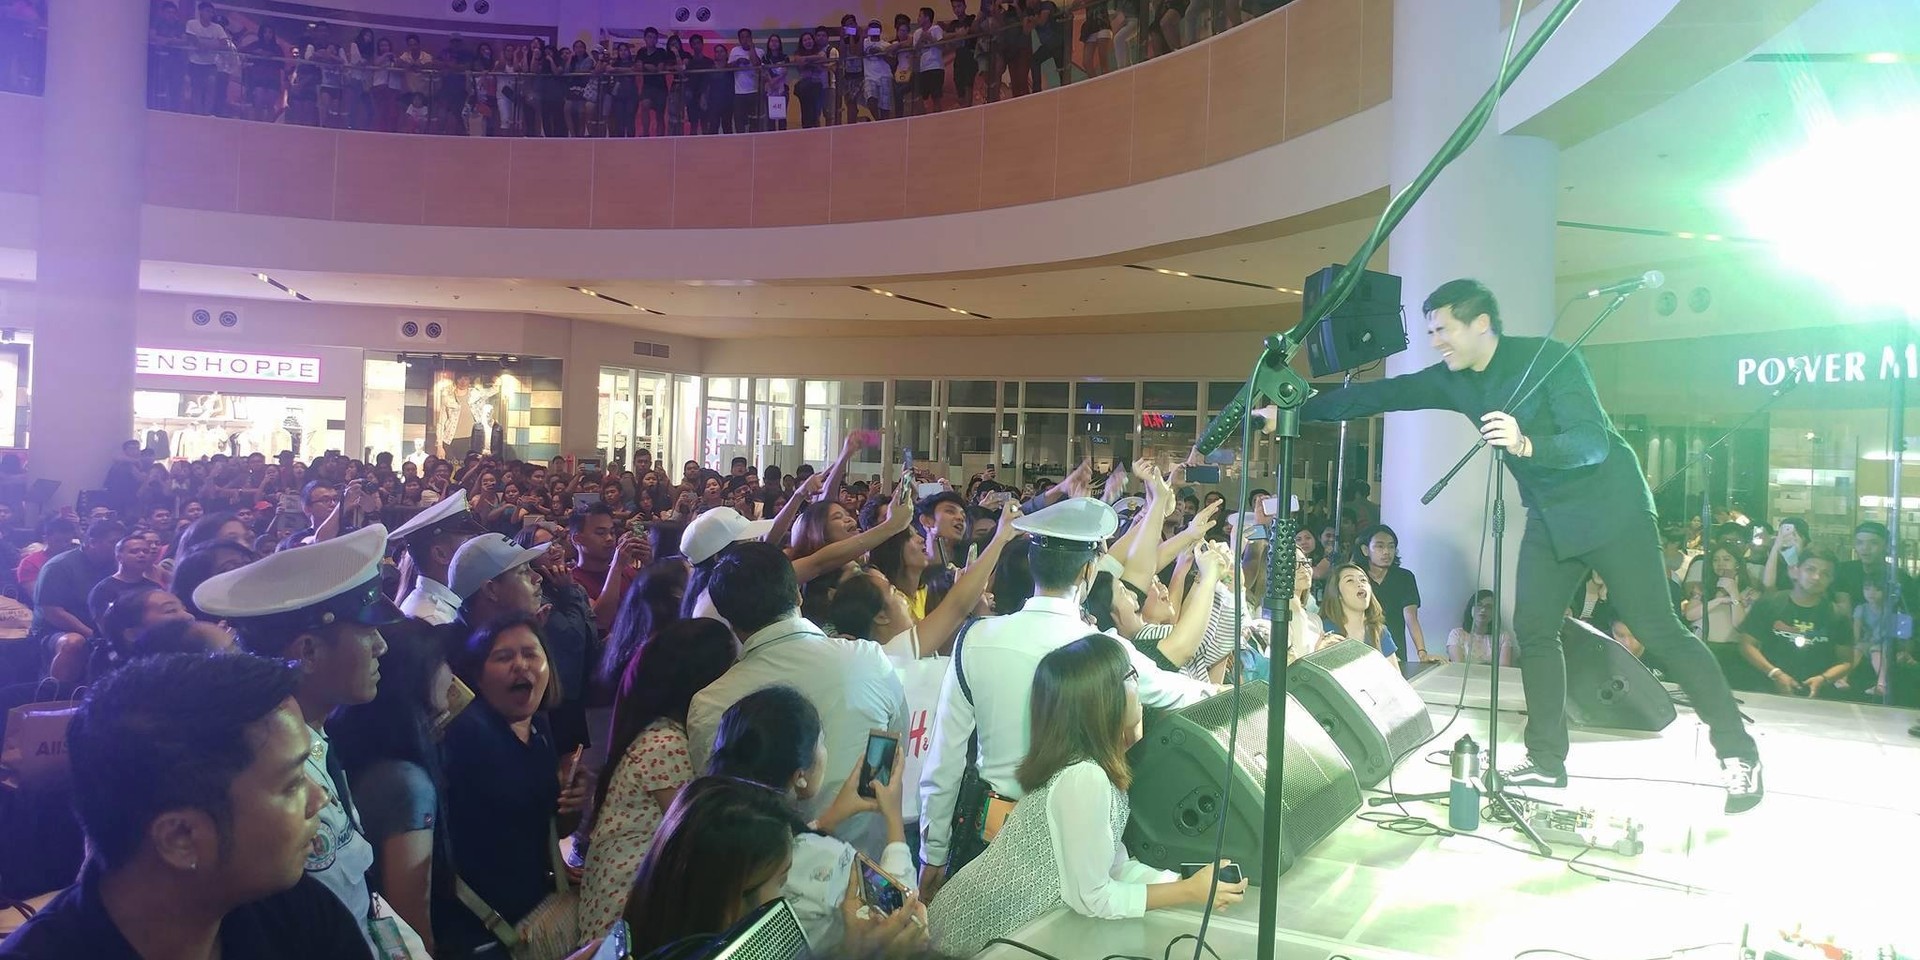 Hale takes us into the crazy fun world of Filipino mall shows